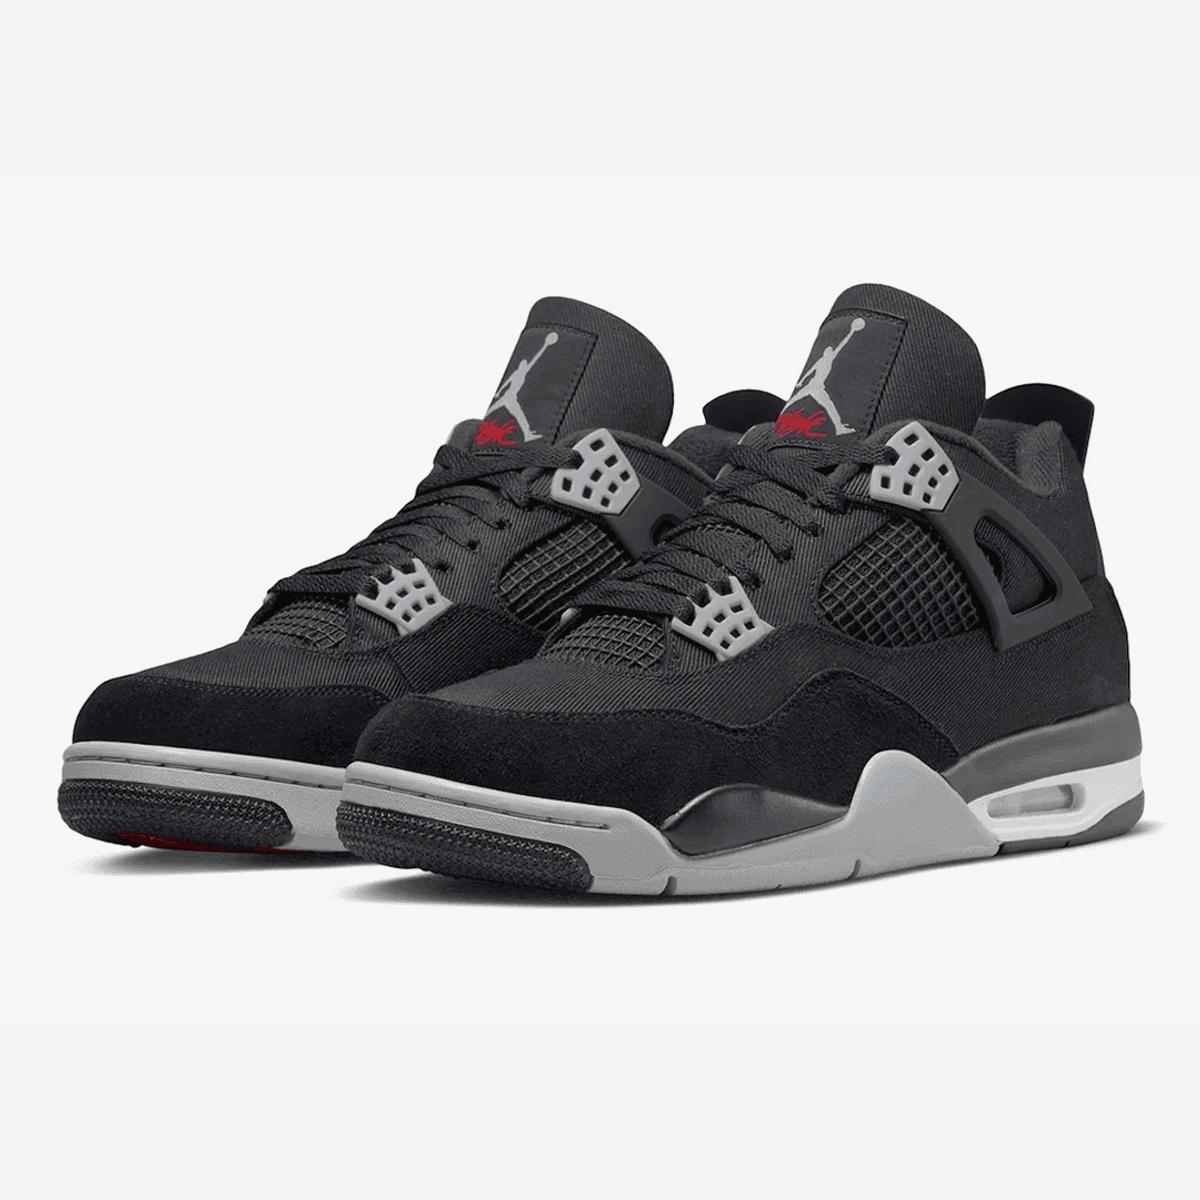 The Air Jordan 4 Black Canvas Drops Just In Time For Spooky Season